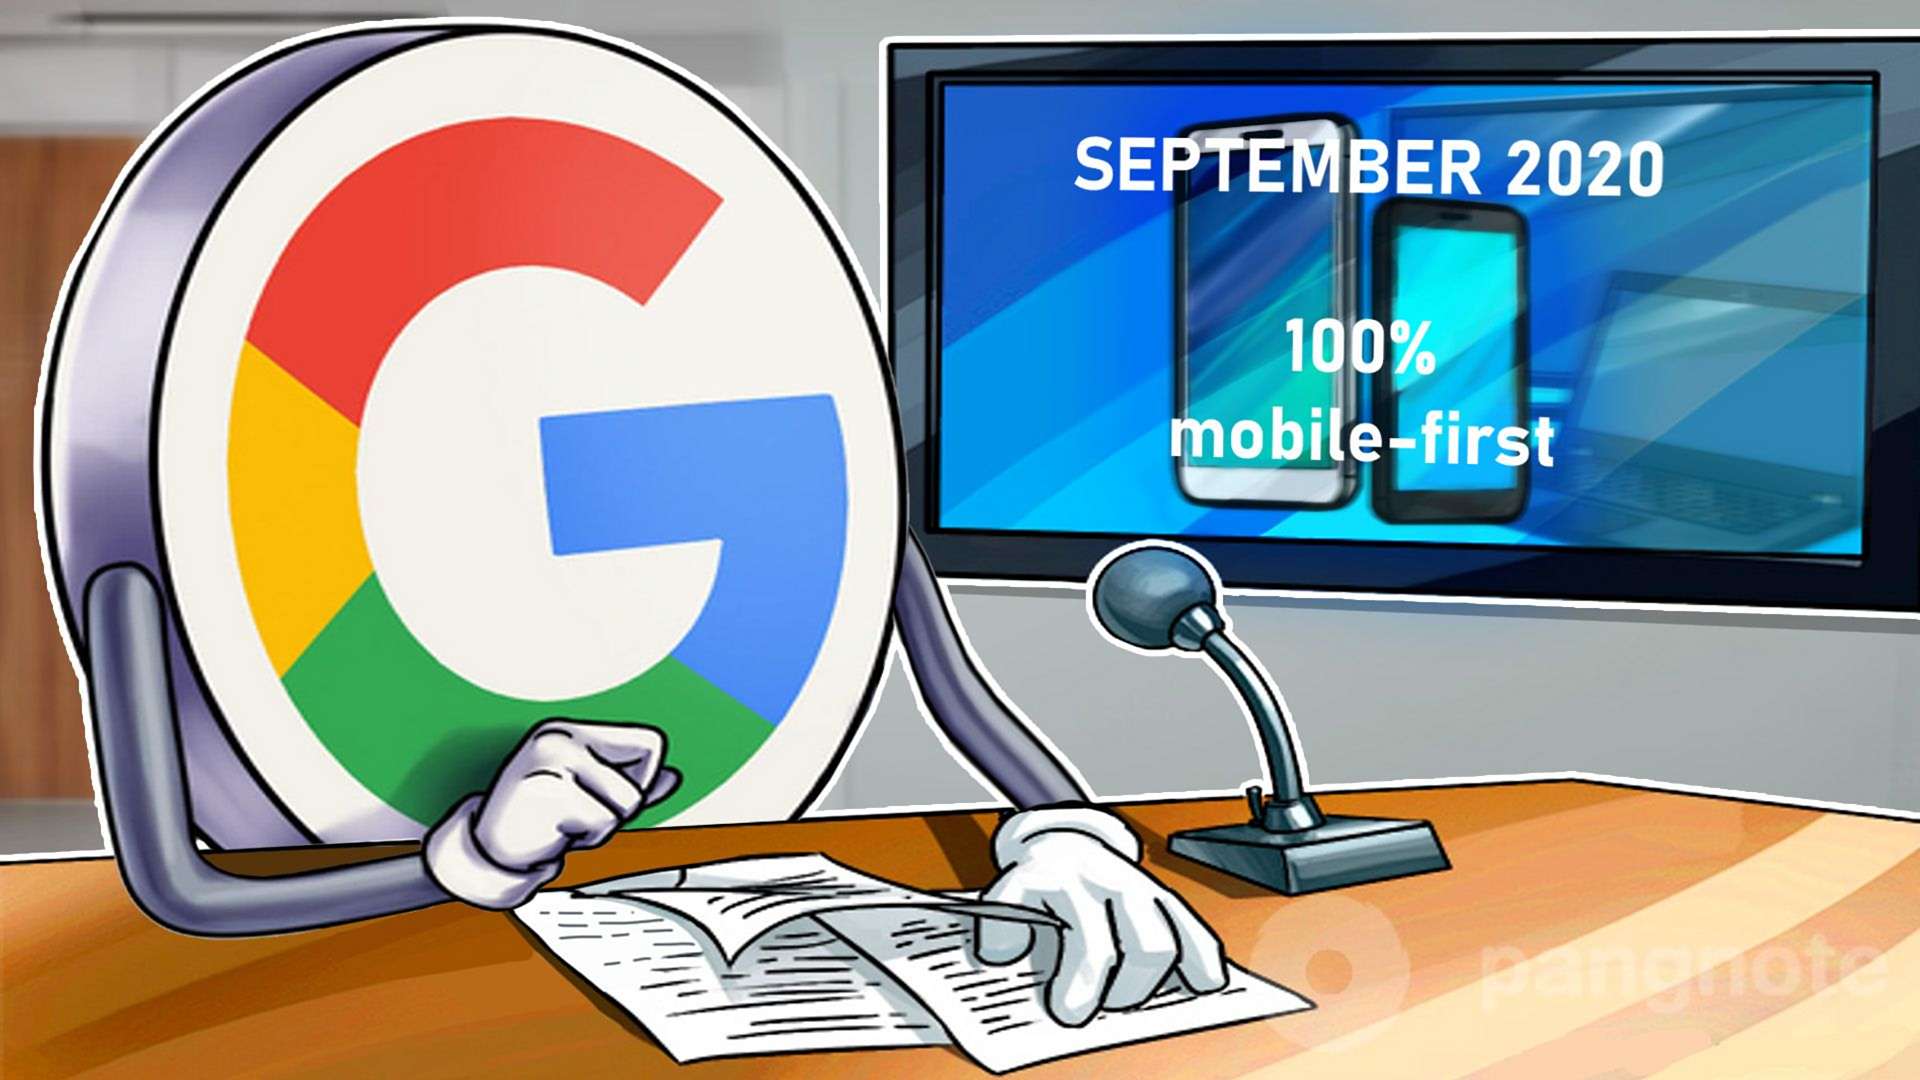 From September 2020 Google introduces a 100% mobile-first serch results